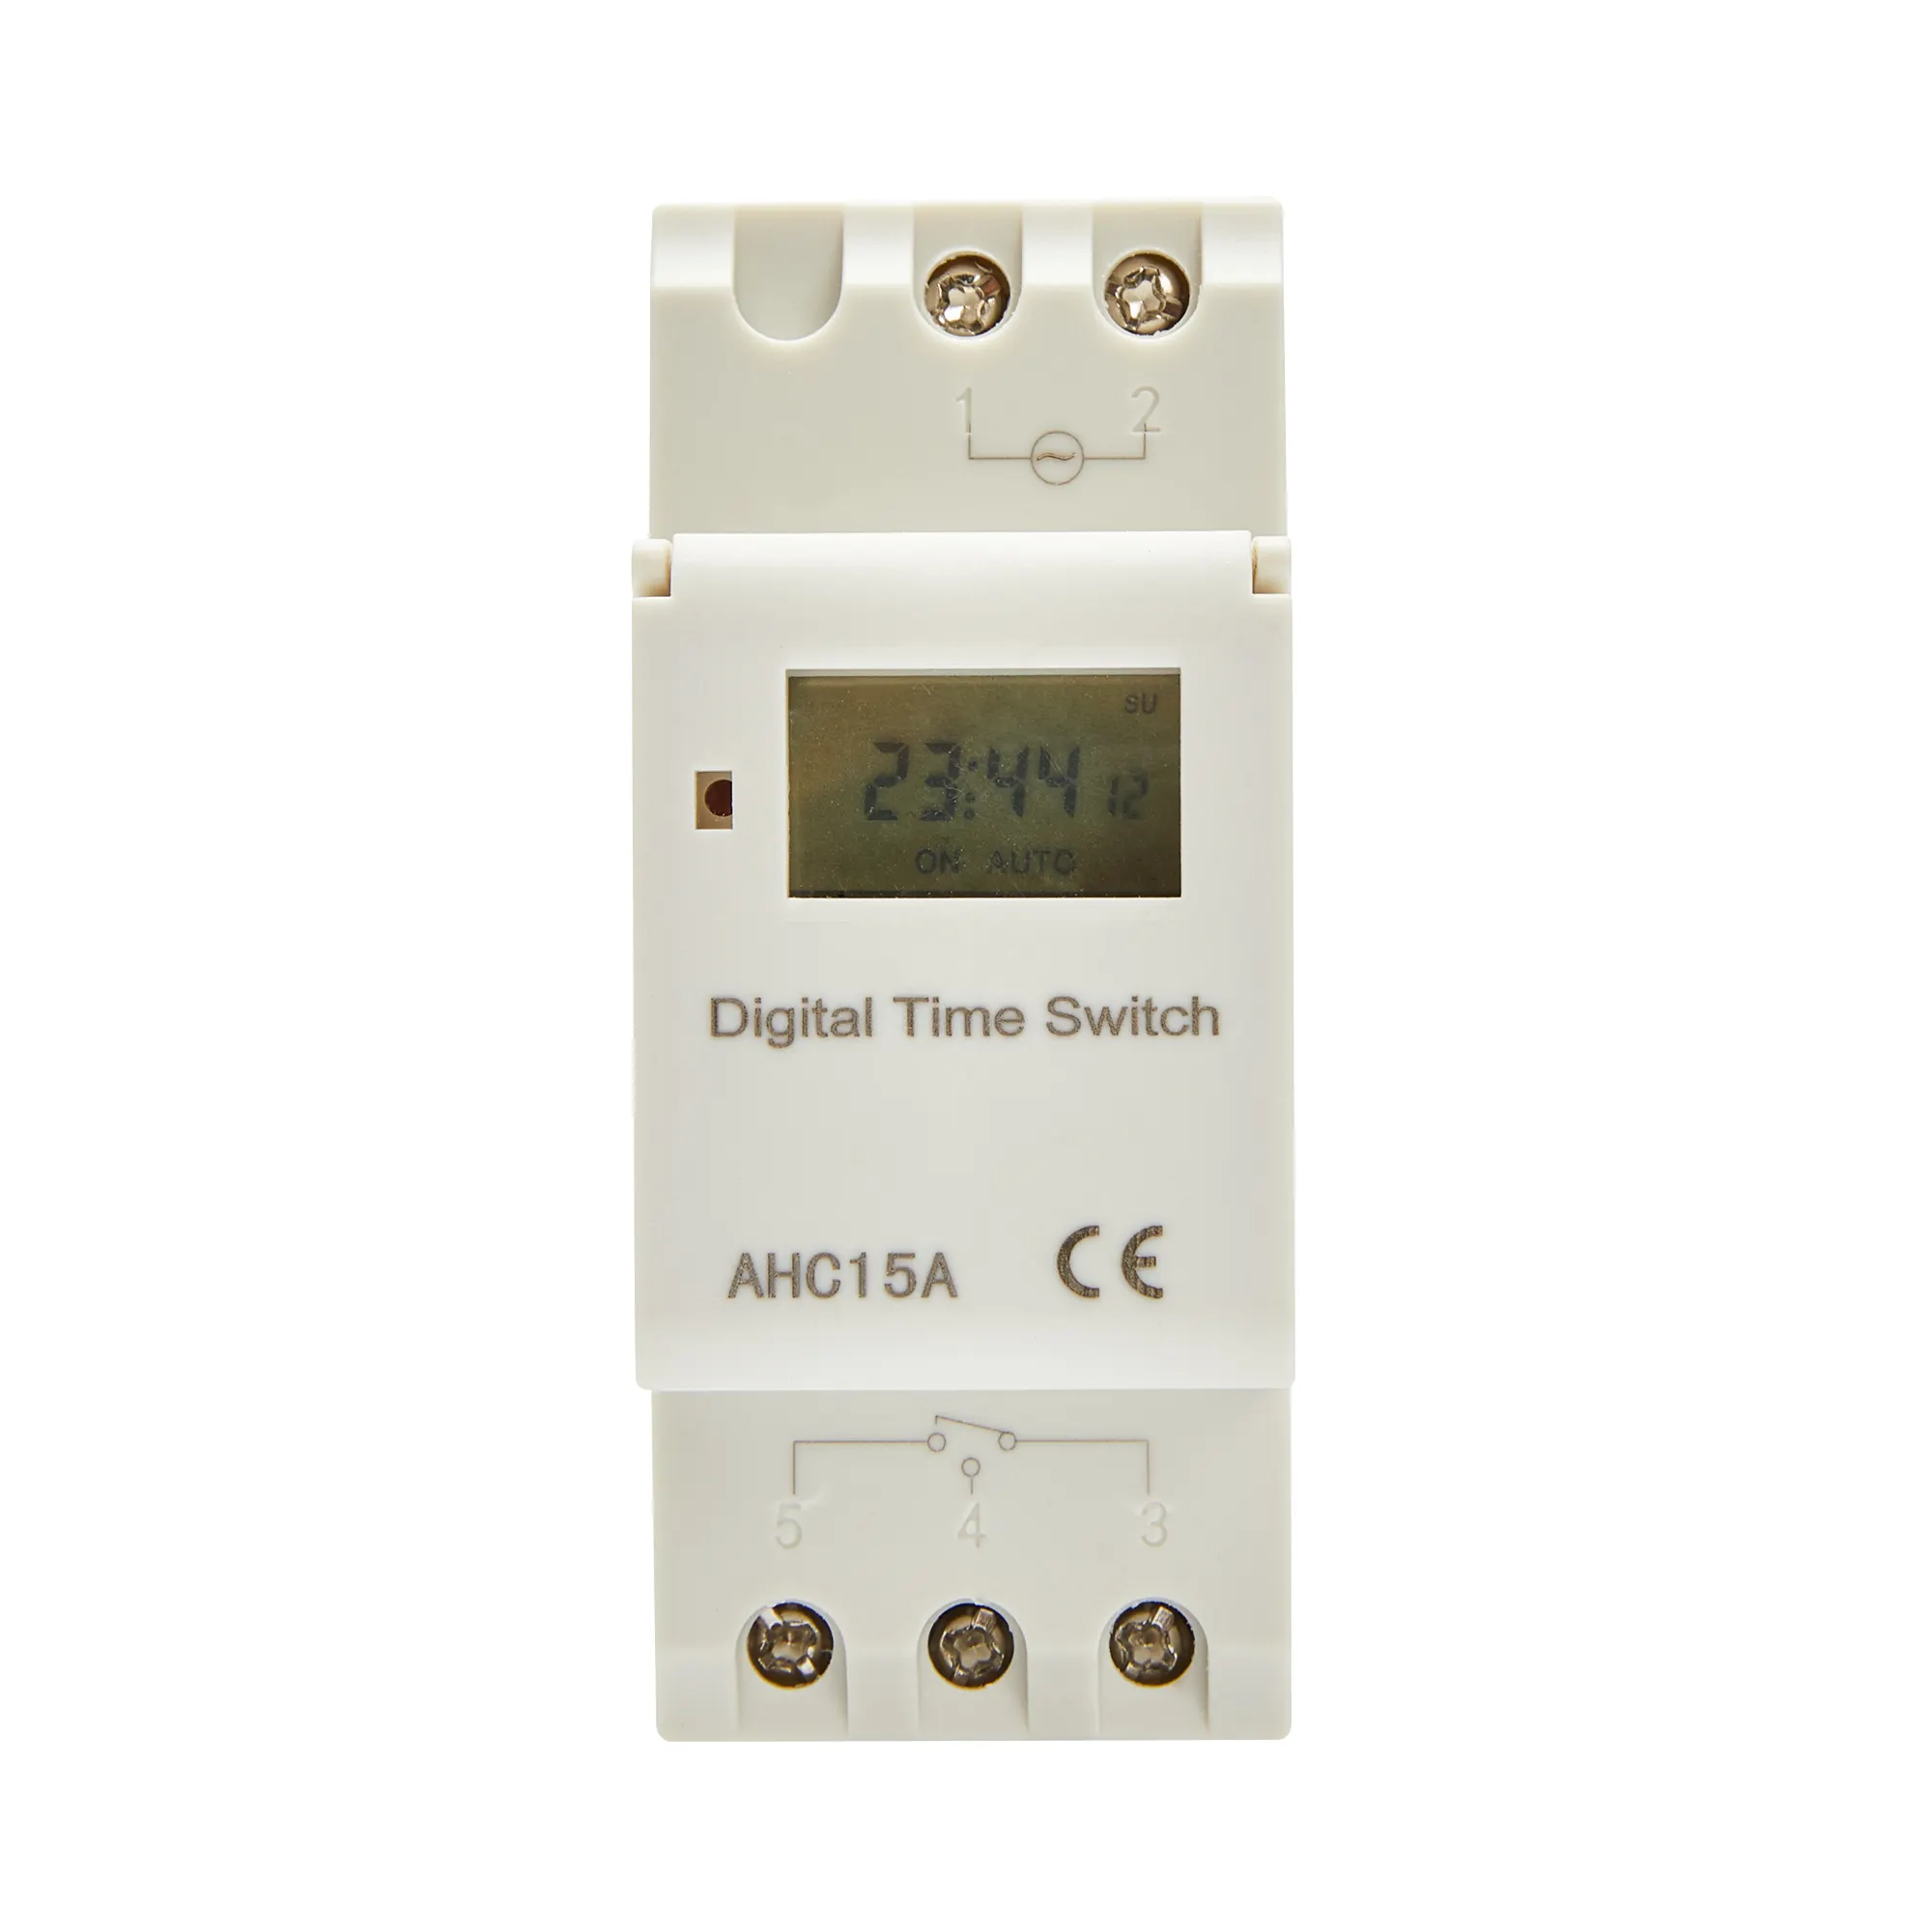 Factory Produce AHC15A 16 Sets Weekly Program Electronic Led Digital Display Timer Switch Relay for Time Control Household